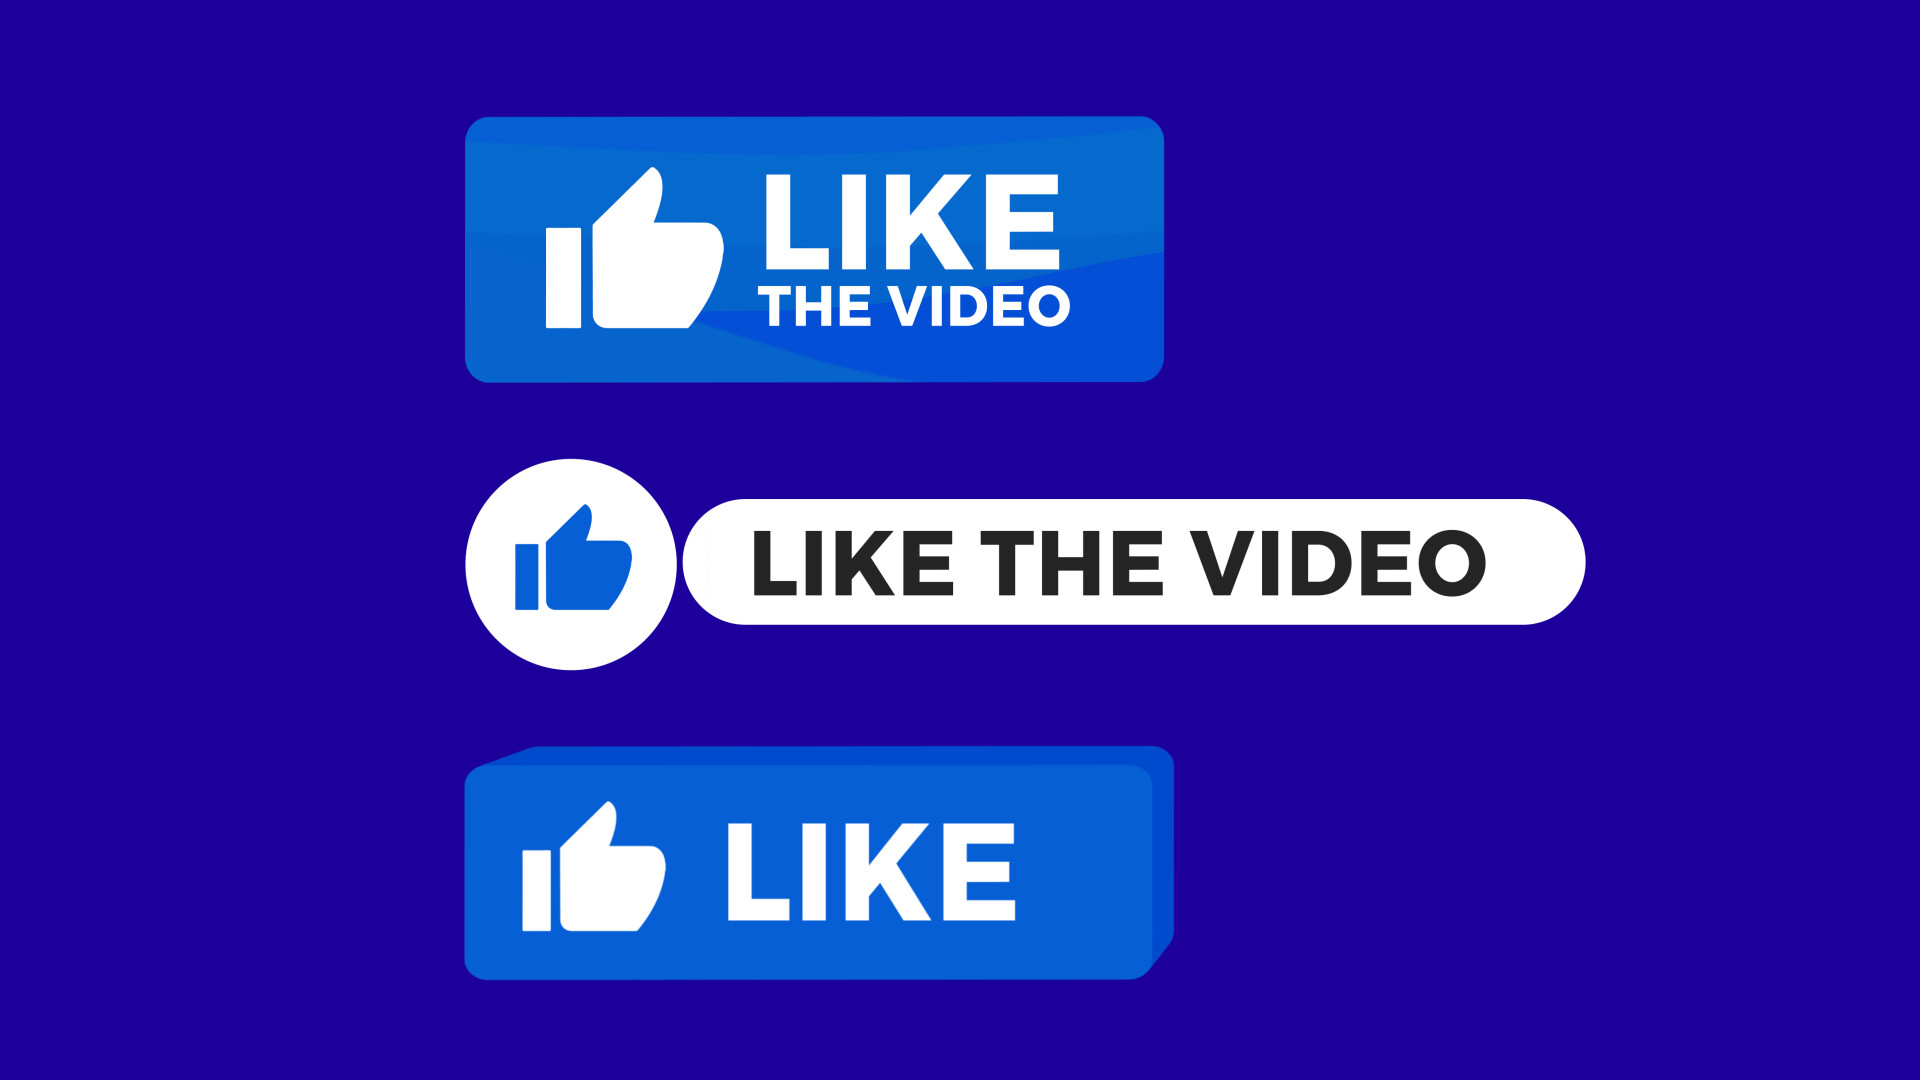 Share Button Animation by LetUsCreateSomething on Dribbble